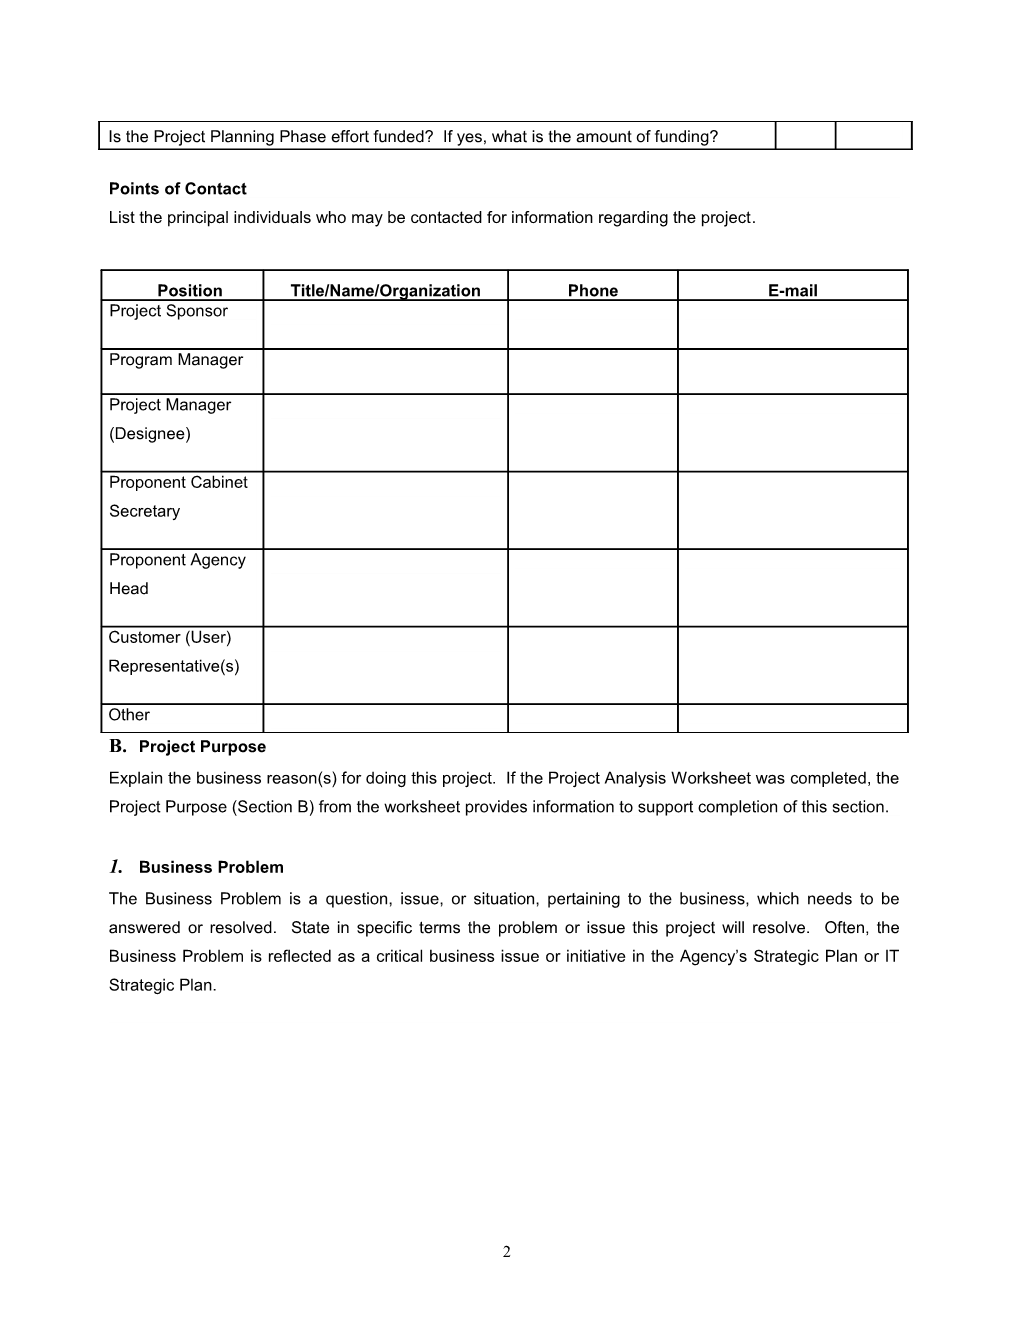 Project Proposal Document Template